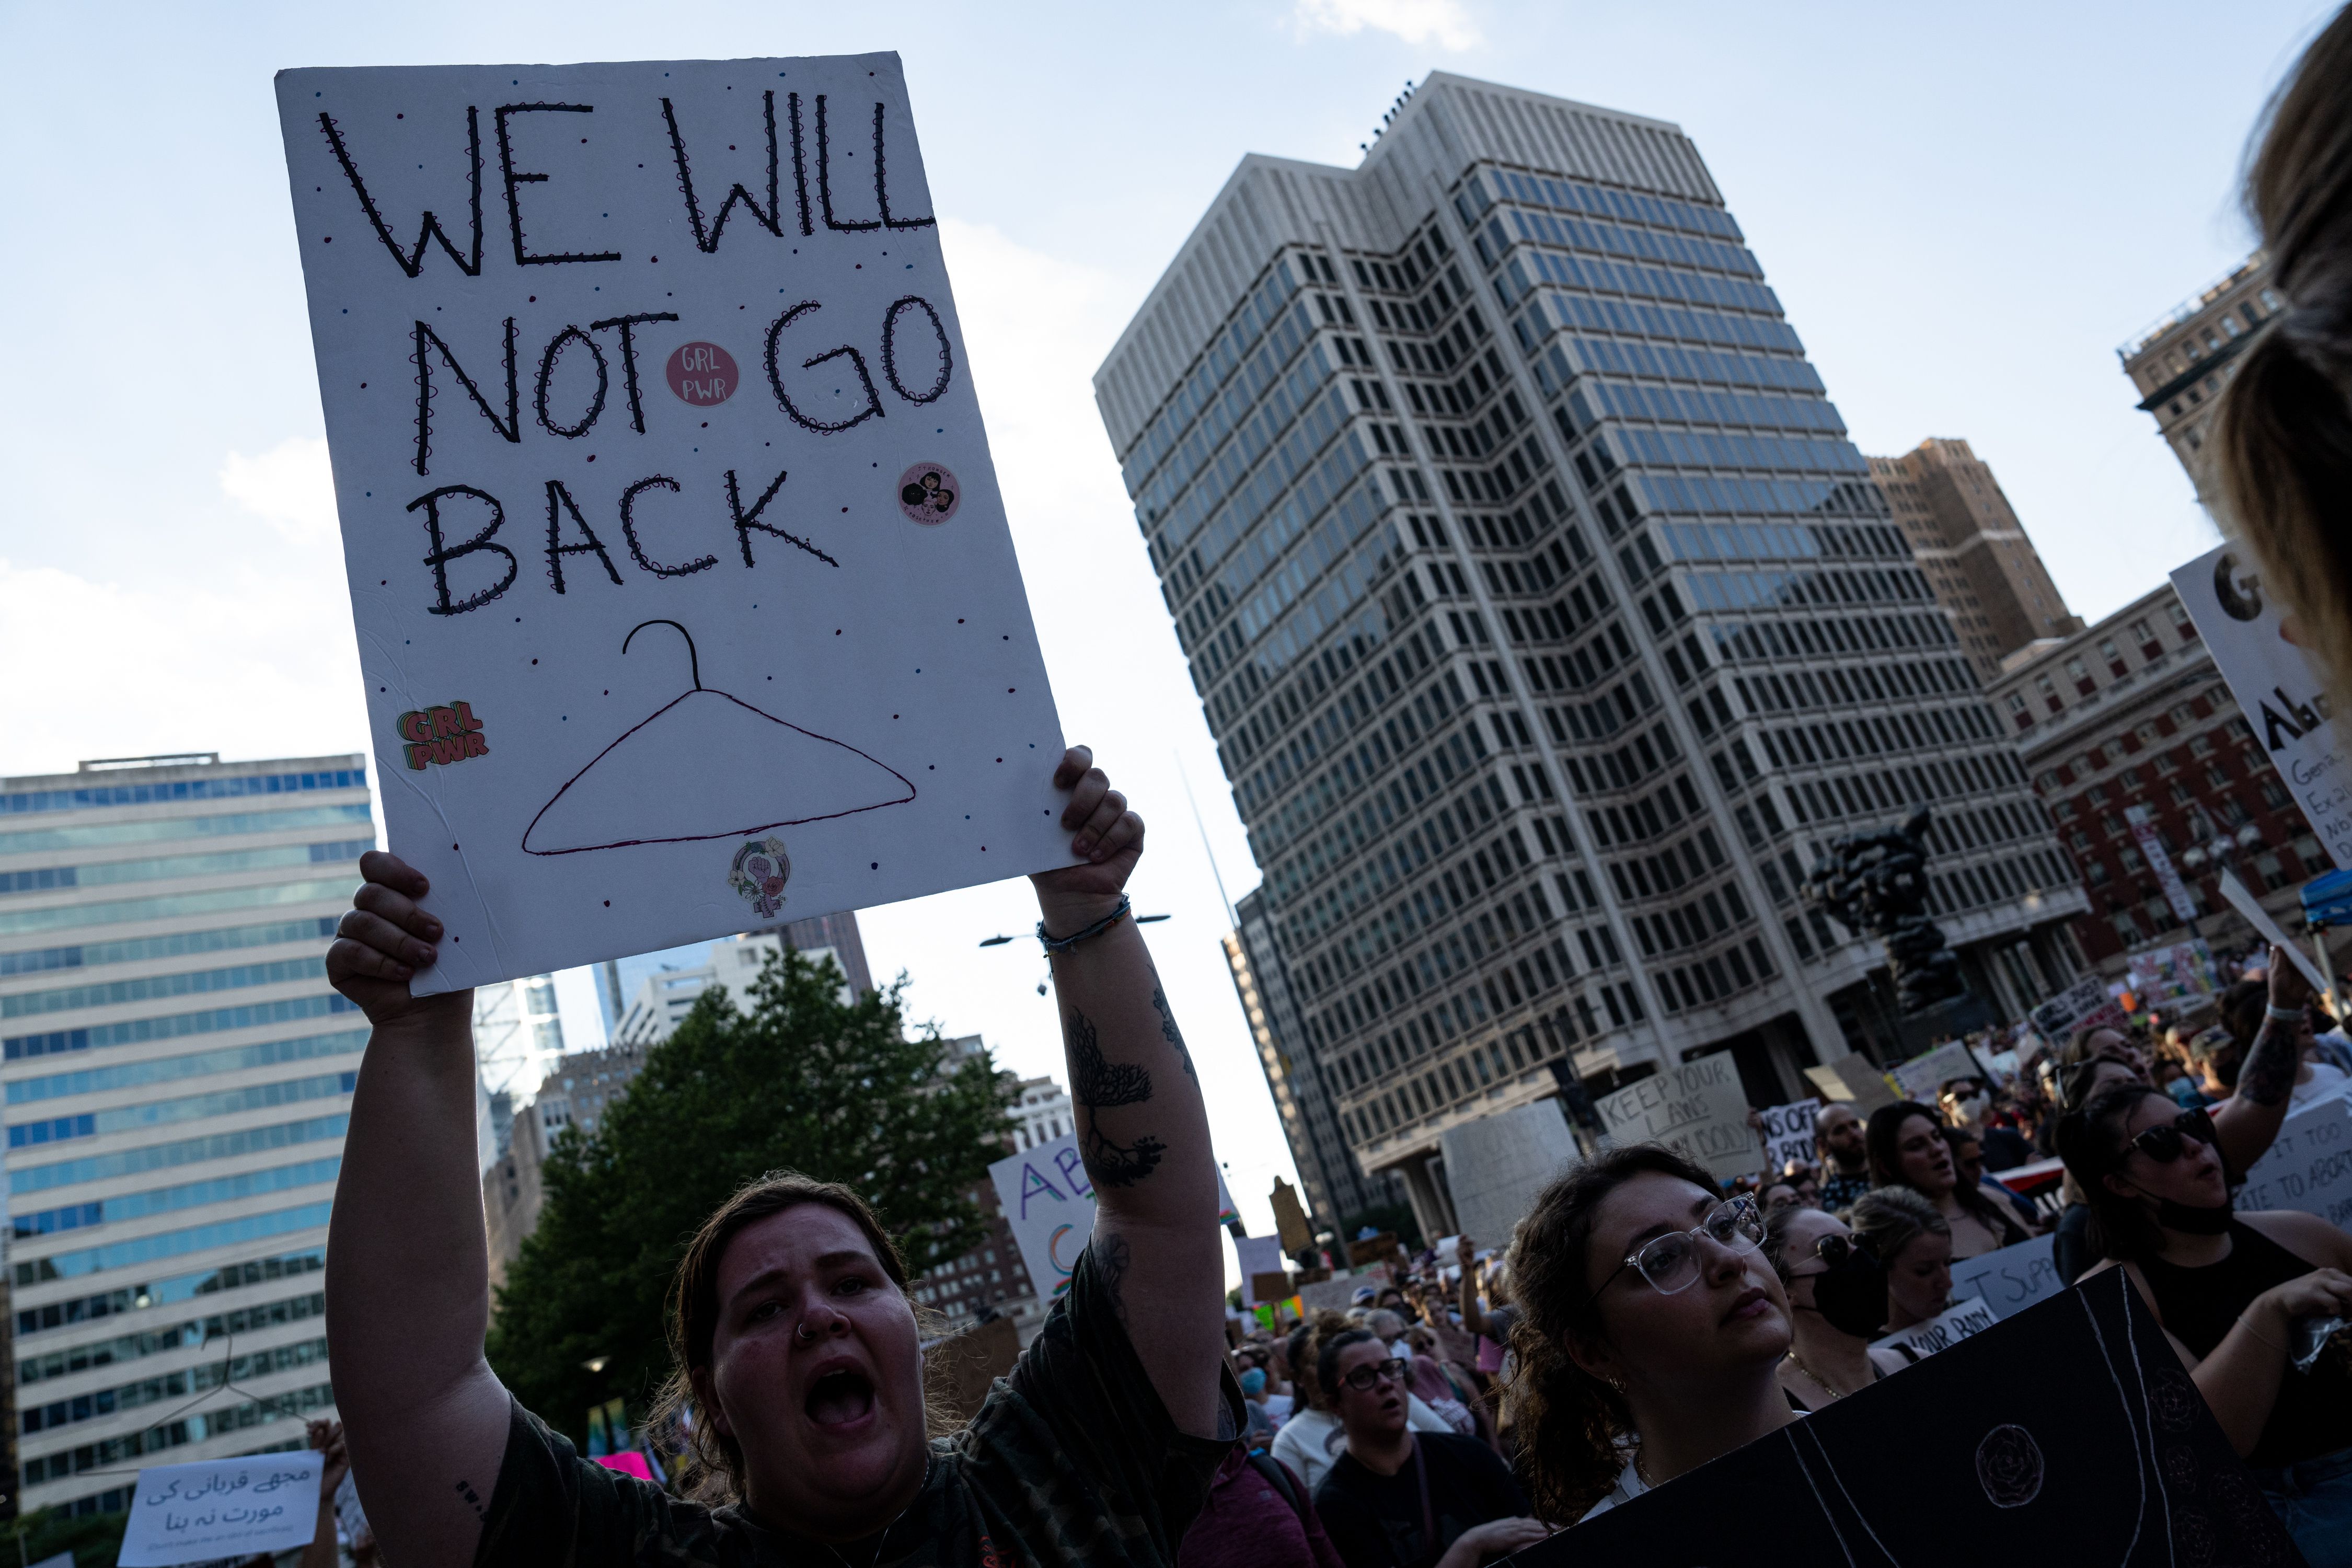 A photo of a woman holding up a sign that says "We will not go back" outside of Philadelphia City Hall.